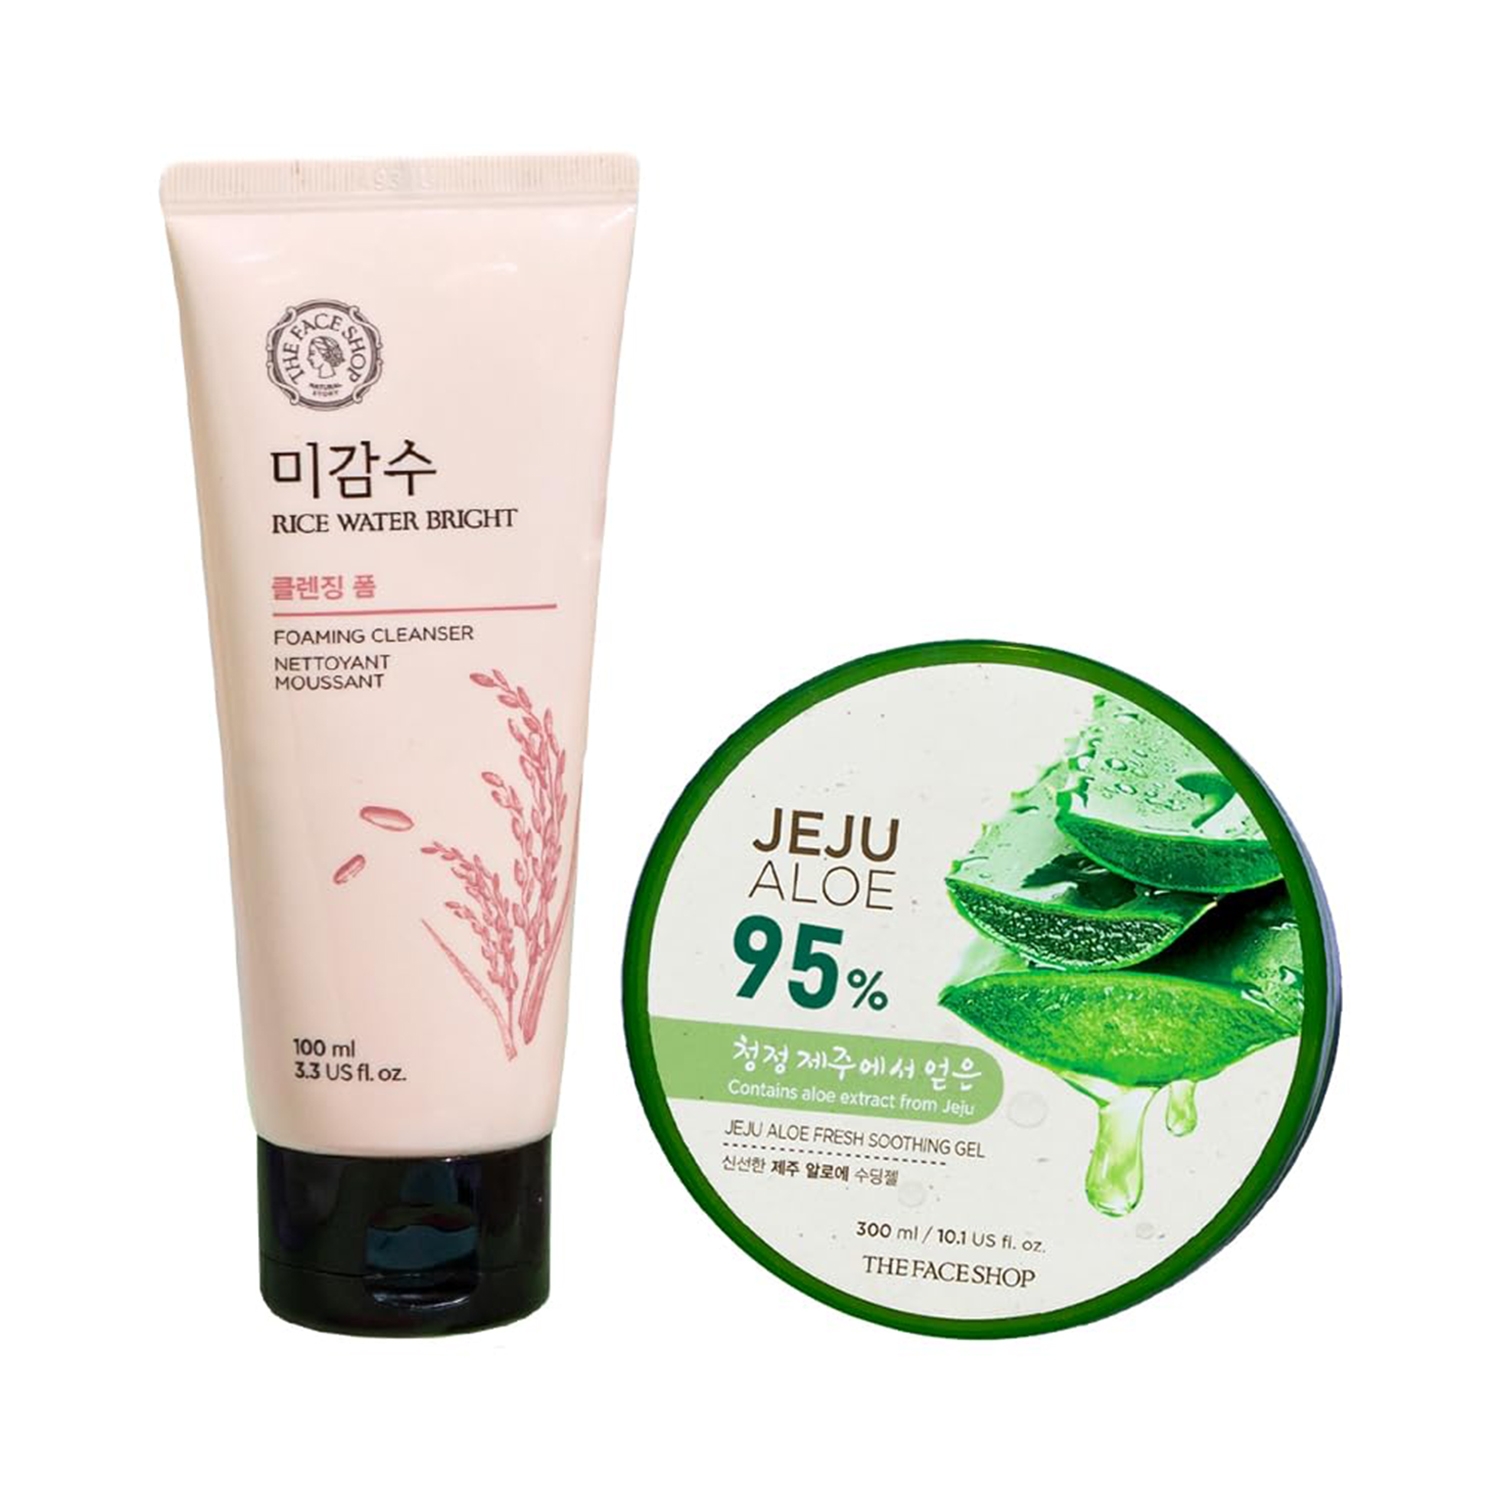 The Face Shop | The Face Shop Rice Water Bright Cleansing Foam and Jeju Aloe Gel Combo